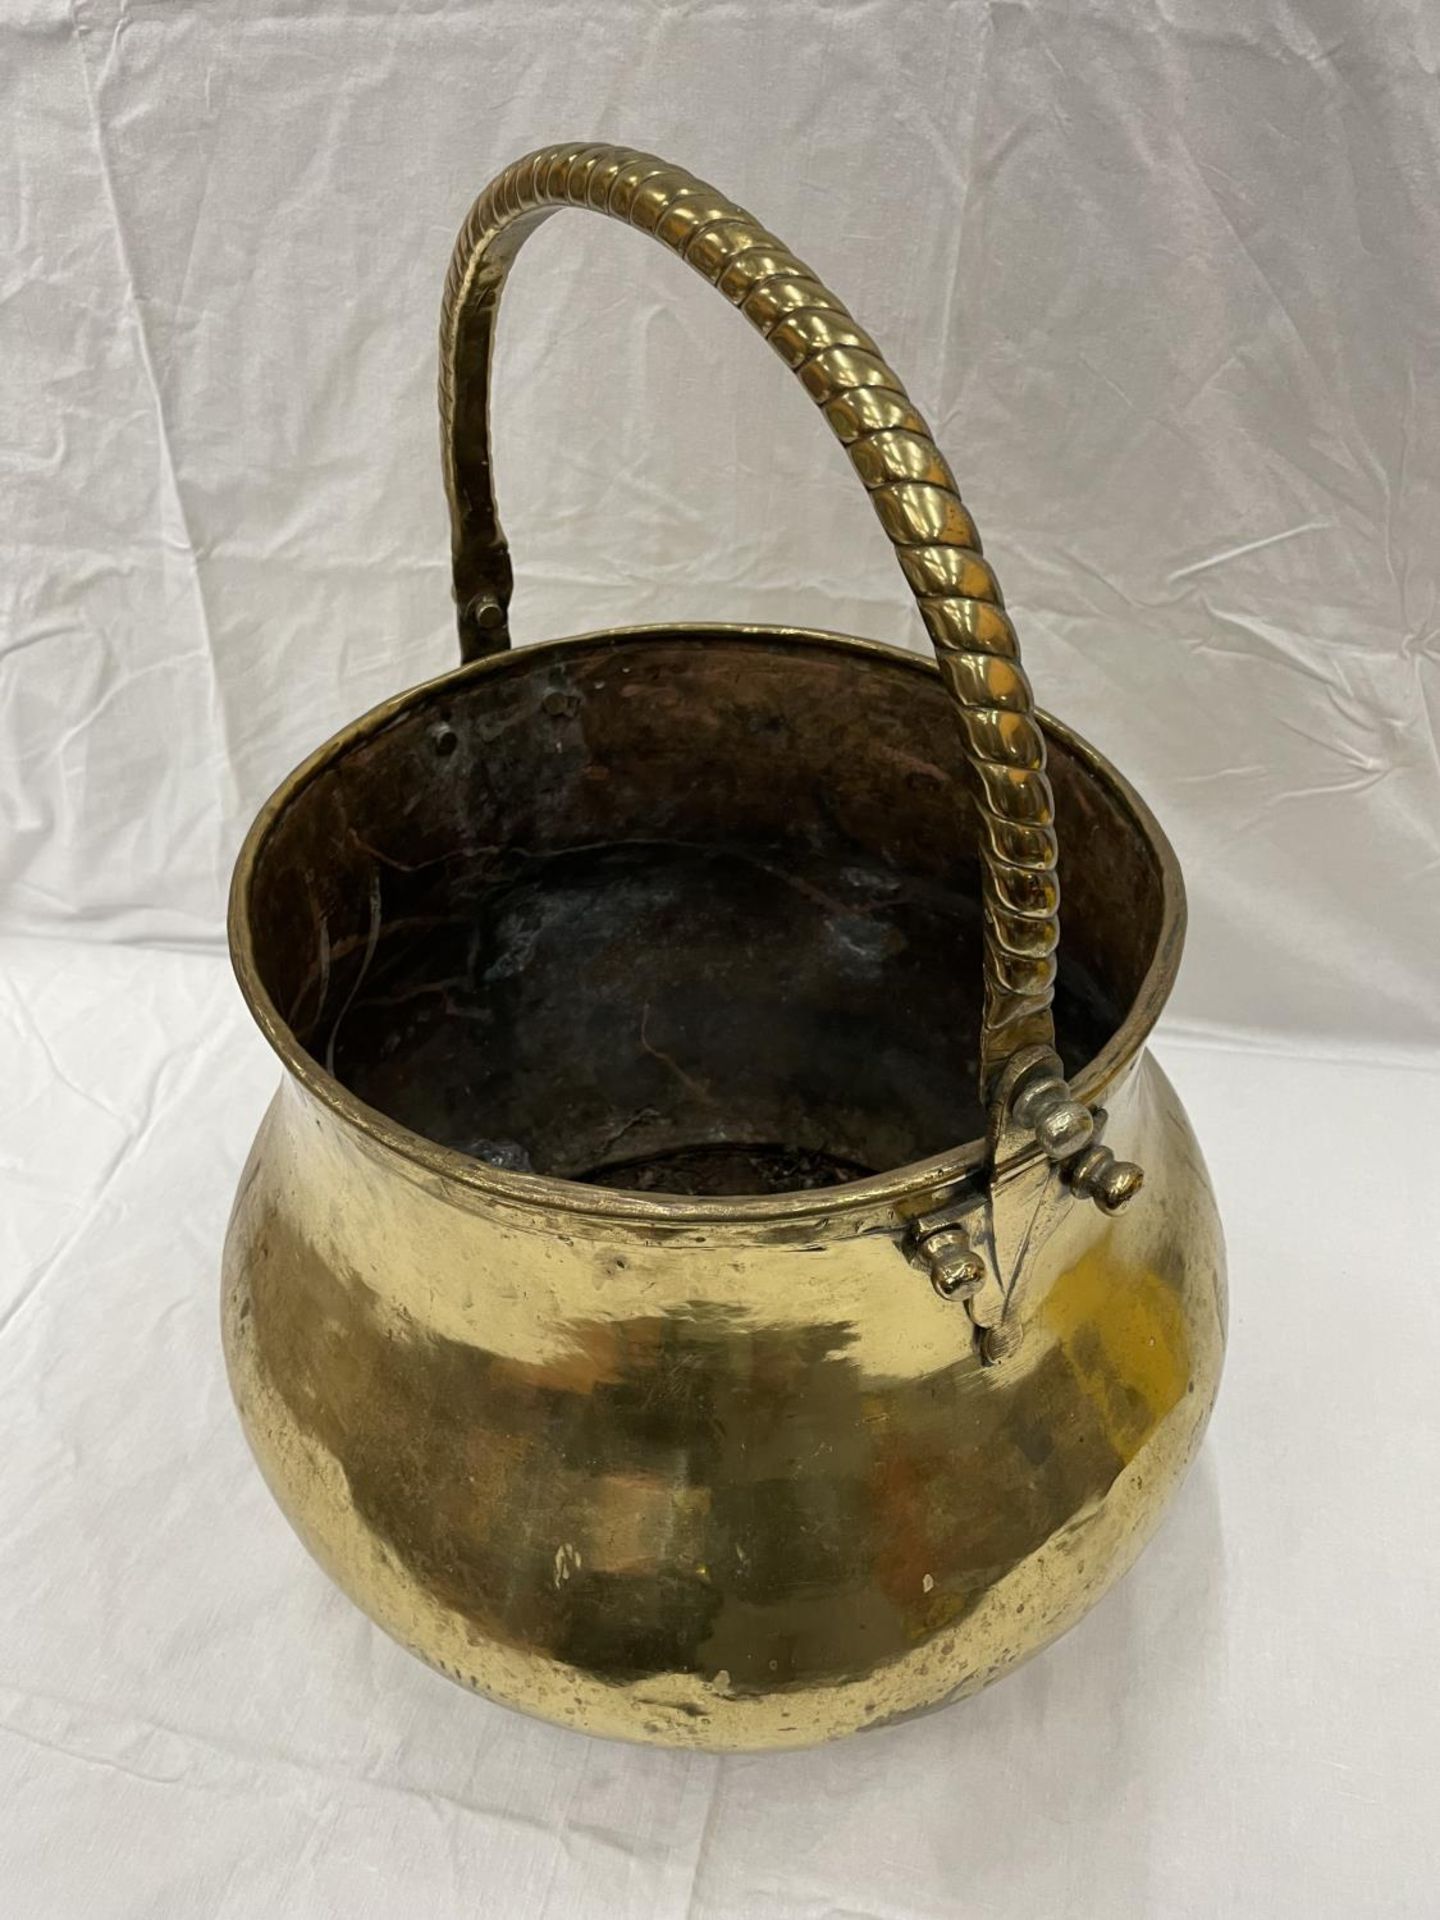 A VERY LARGE BRASS CAULDRON WITH THREE BALL FEET AND A ROPE DESIGN, HANDLE HEIGHT 43CM - Image 4 of 6